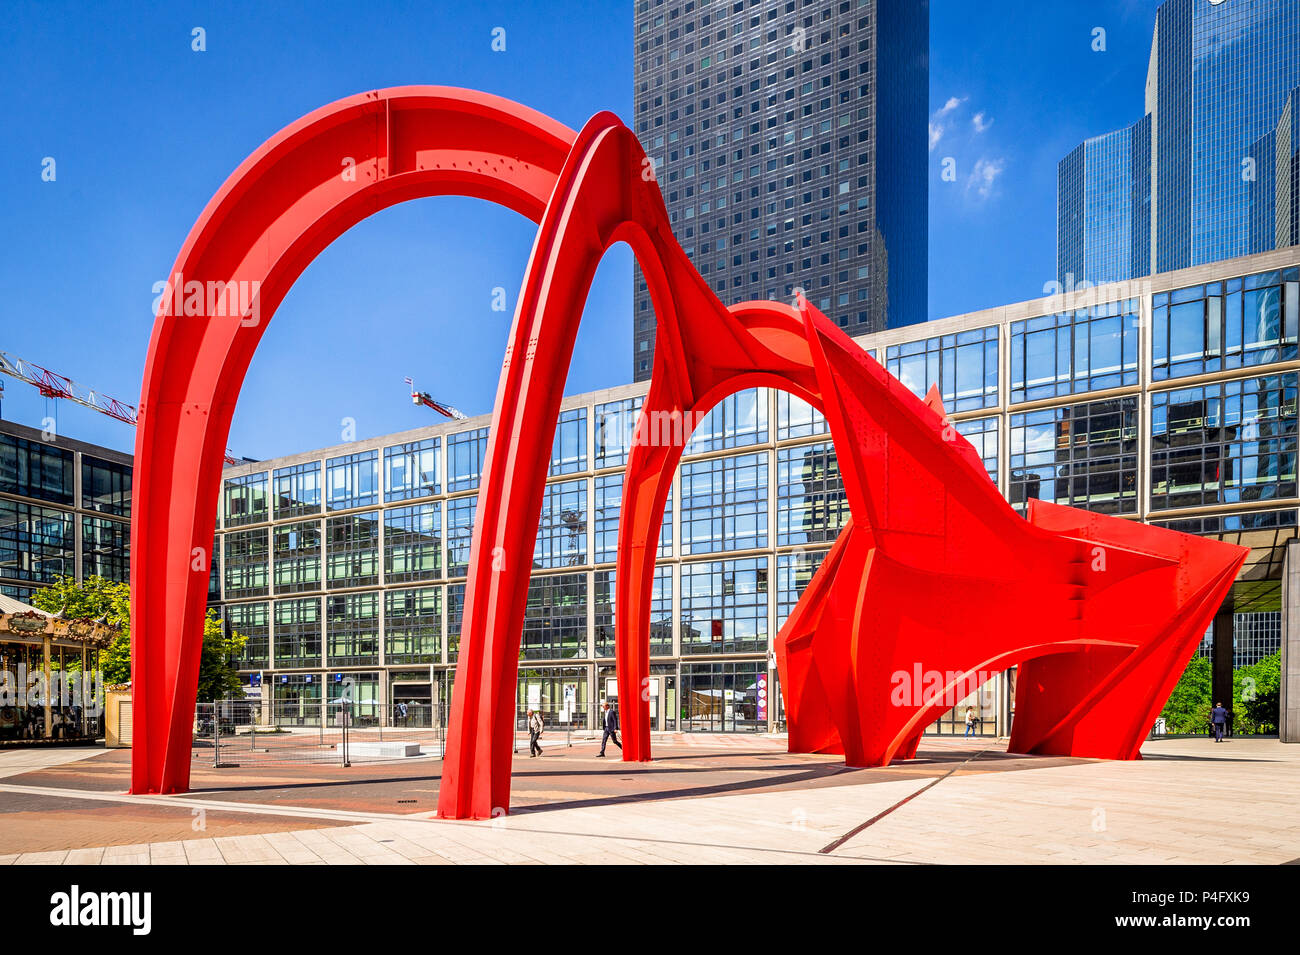 Araignee Rouge" sculpture by Alexander Calder and sits in the La Defense  area in Paris, France Stock Photo - Alamy